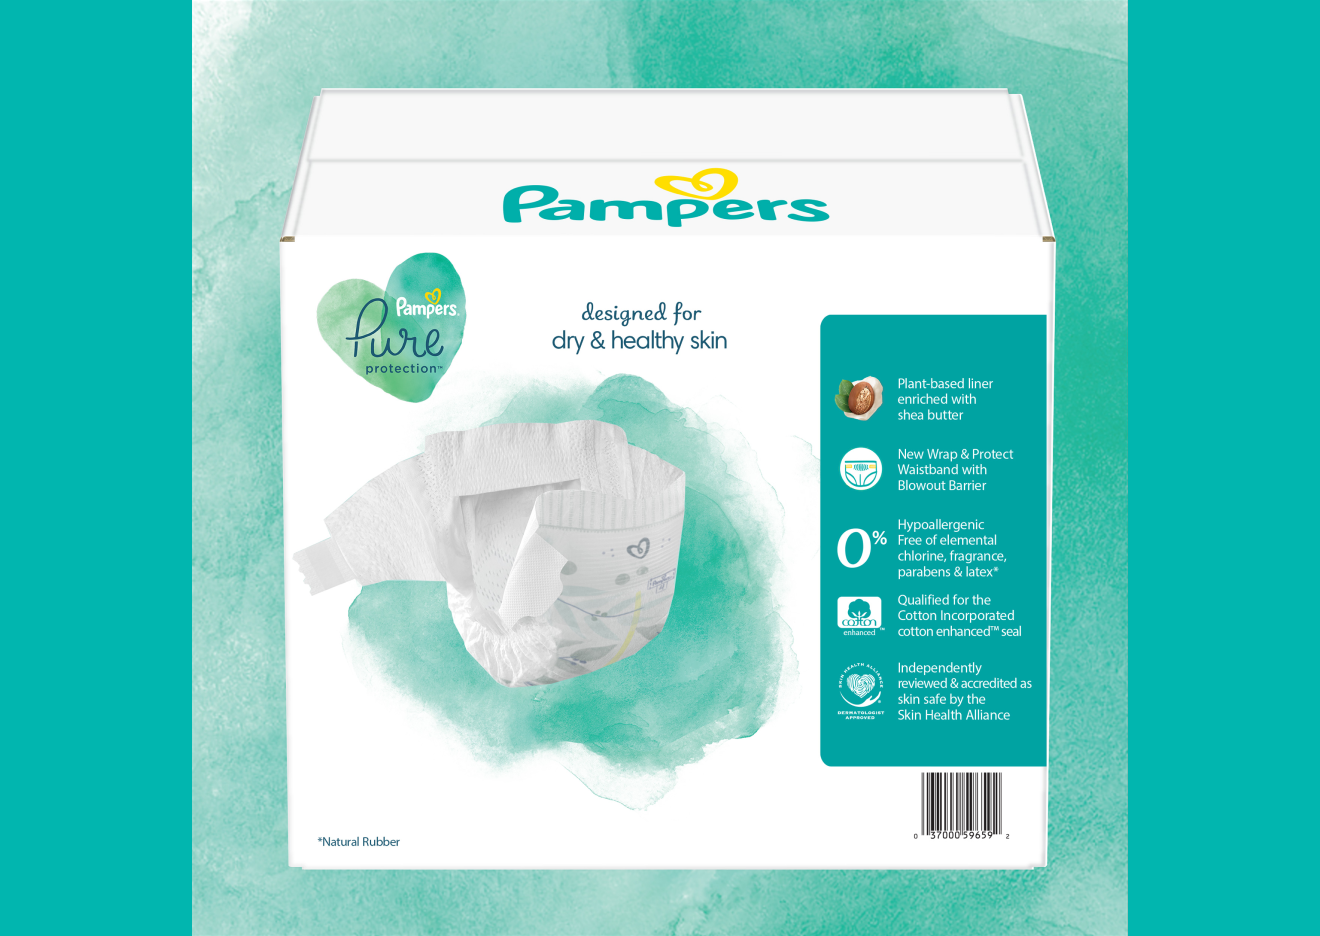 Pampers Pure Protection Diapers Size 5 (Pack of 24), 24 pack - City Market